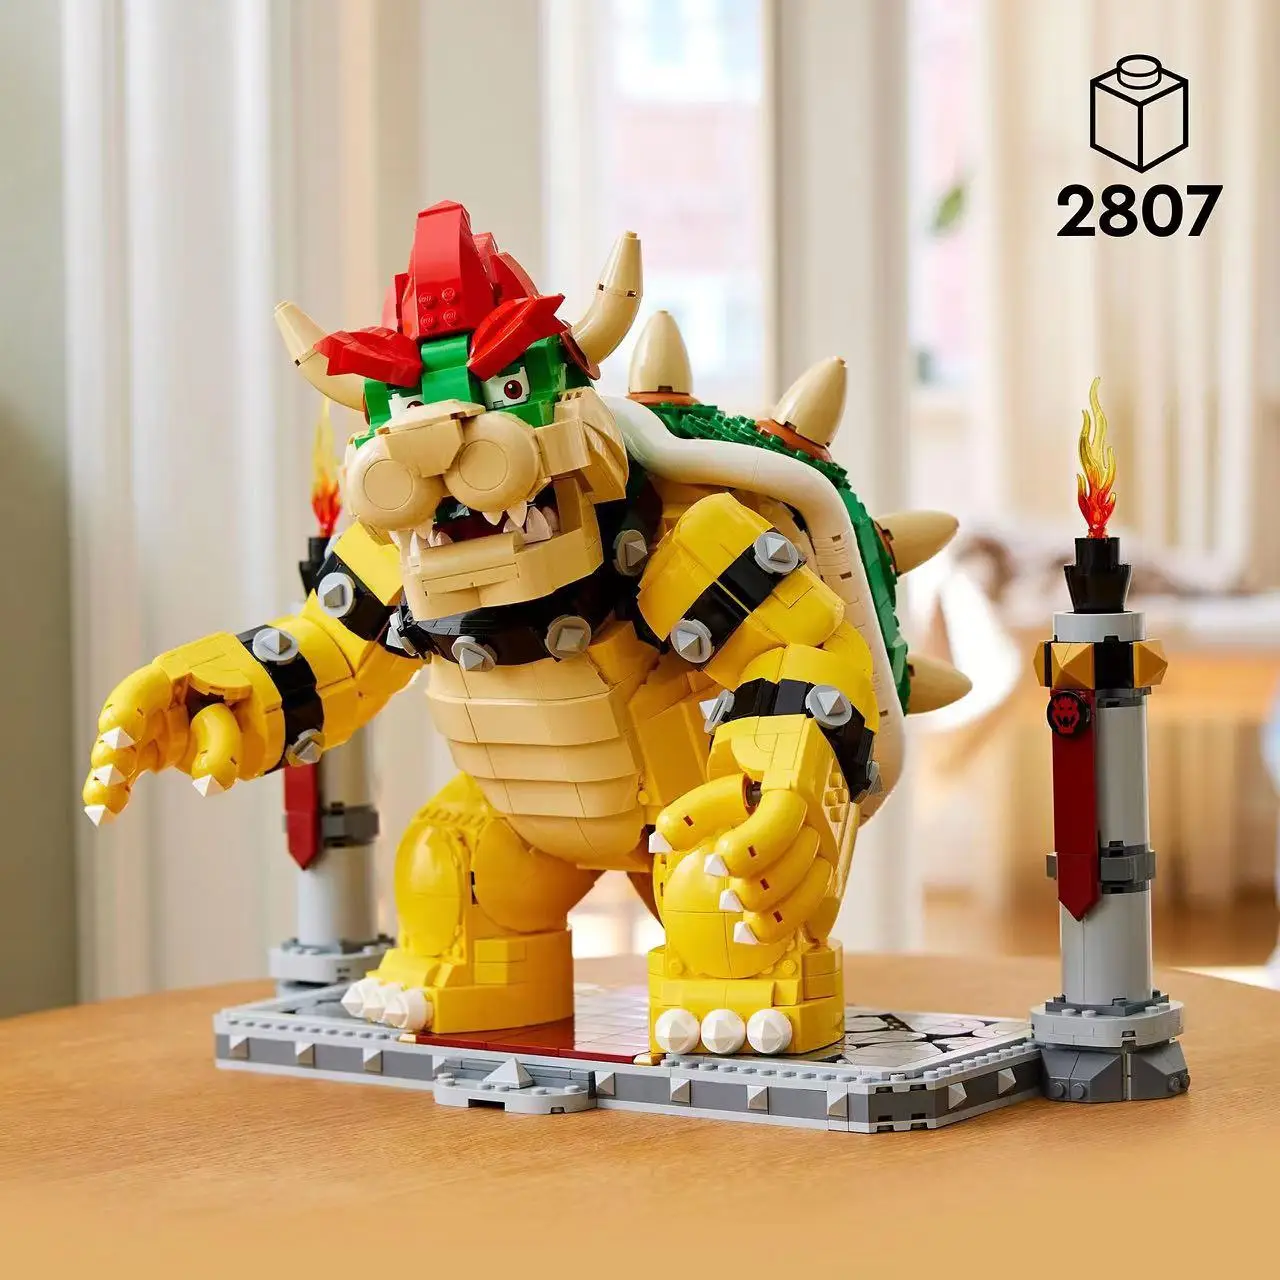 

New 2807pcs The Mighty Bowsered Bricks Super 71411 Assembled Building Block Kit Children Educational Toys Birthday Gifts